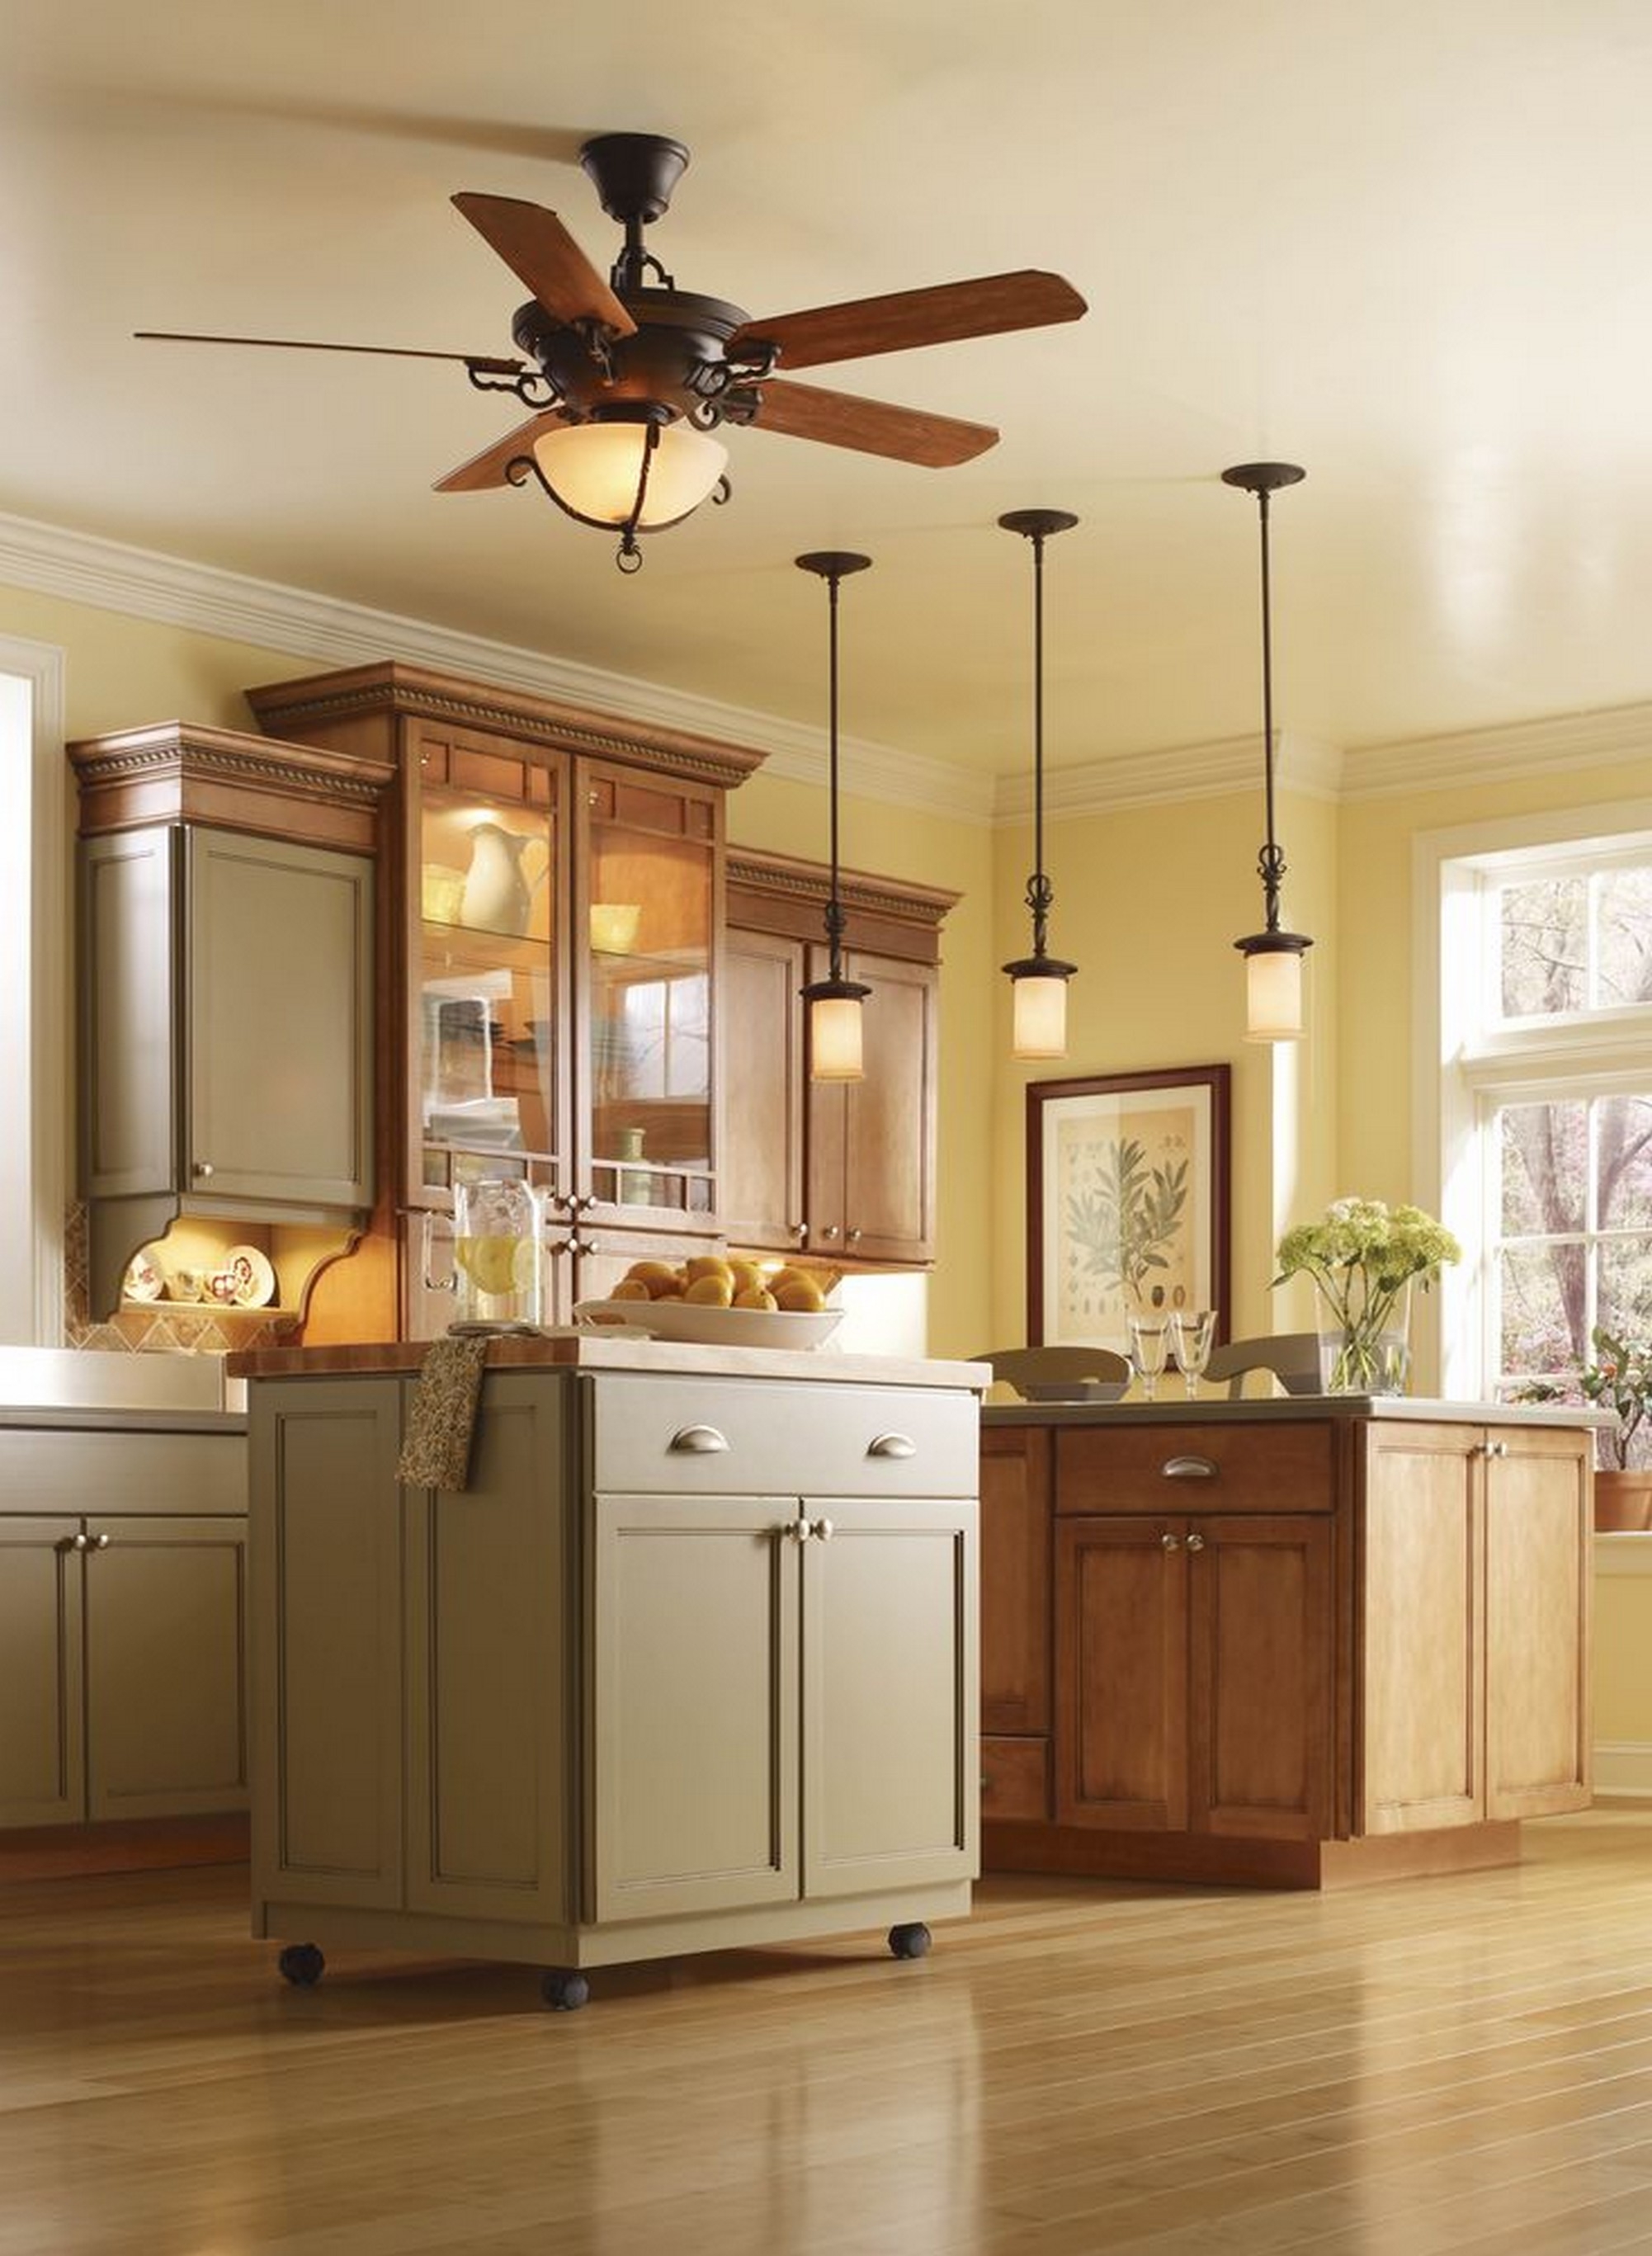 Ceiling Fans With Lights Kitchen